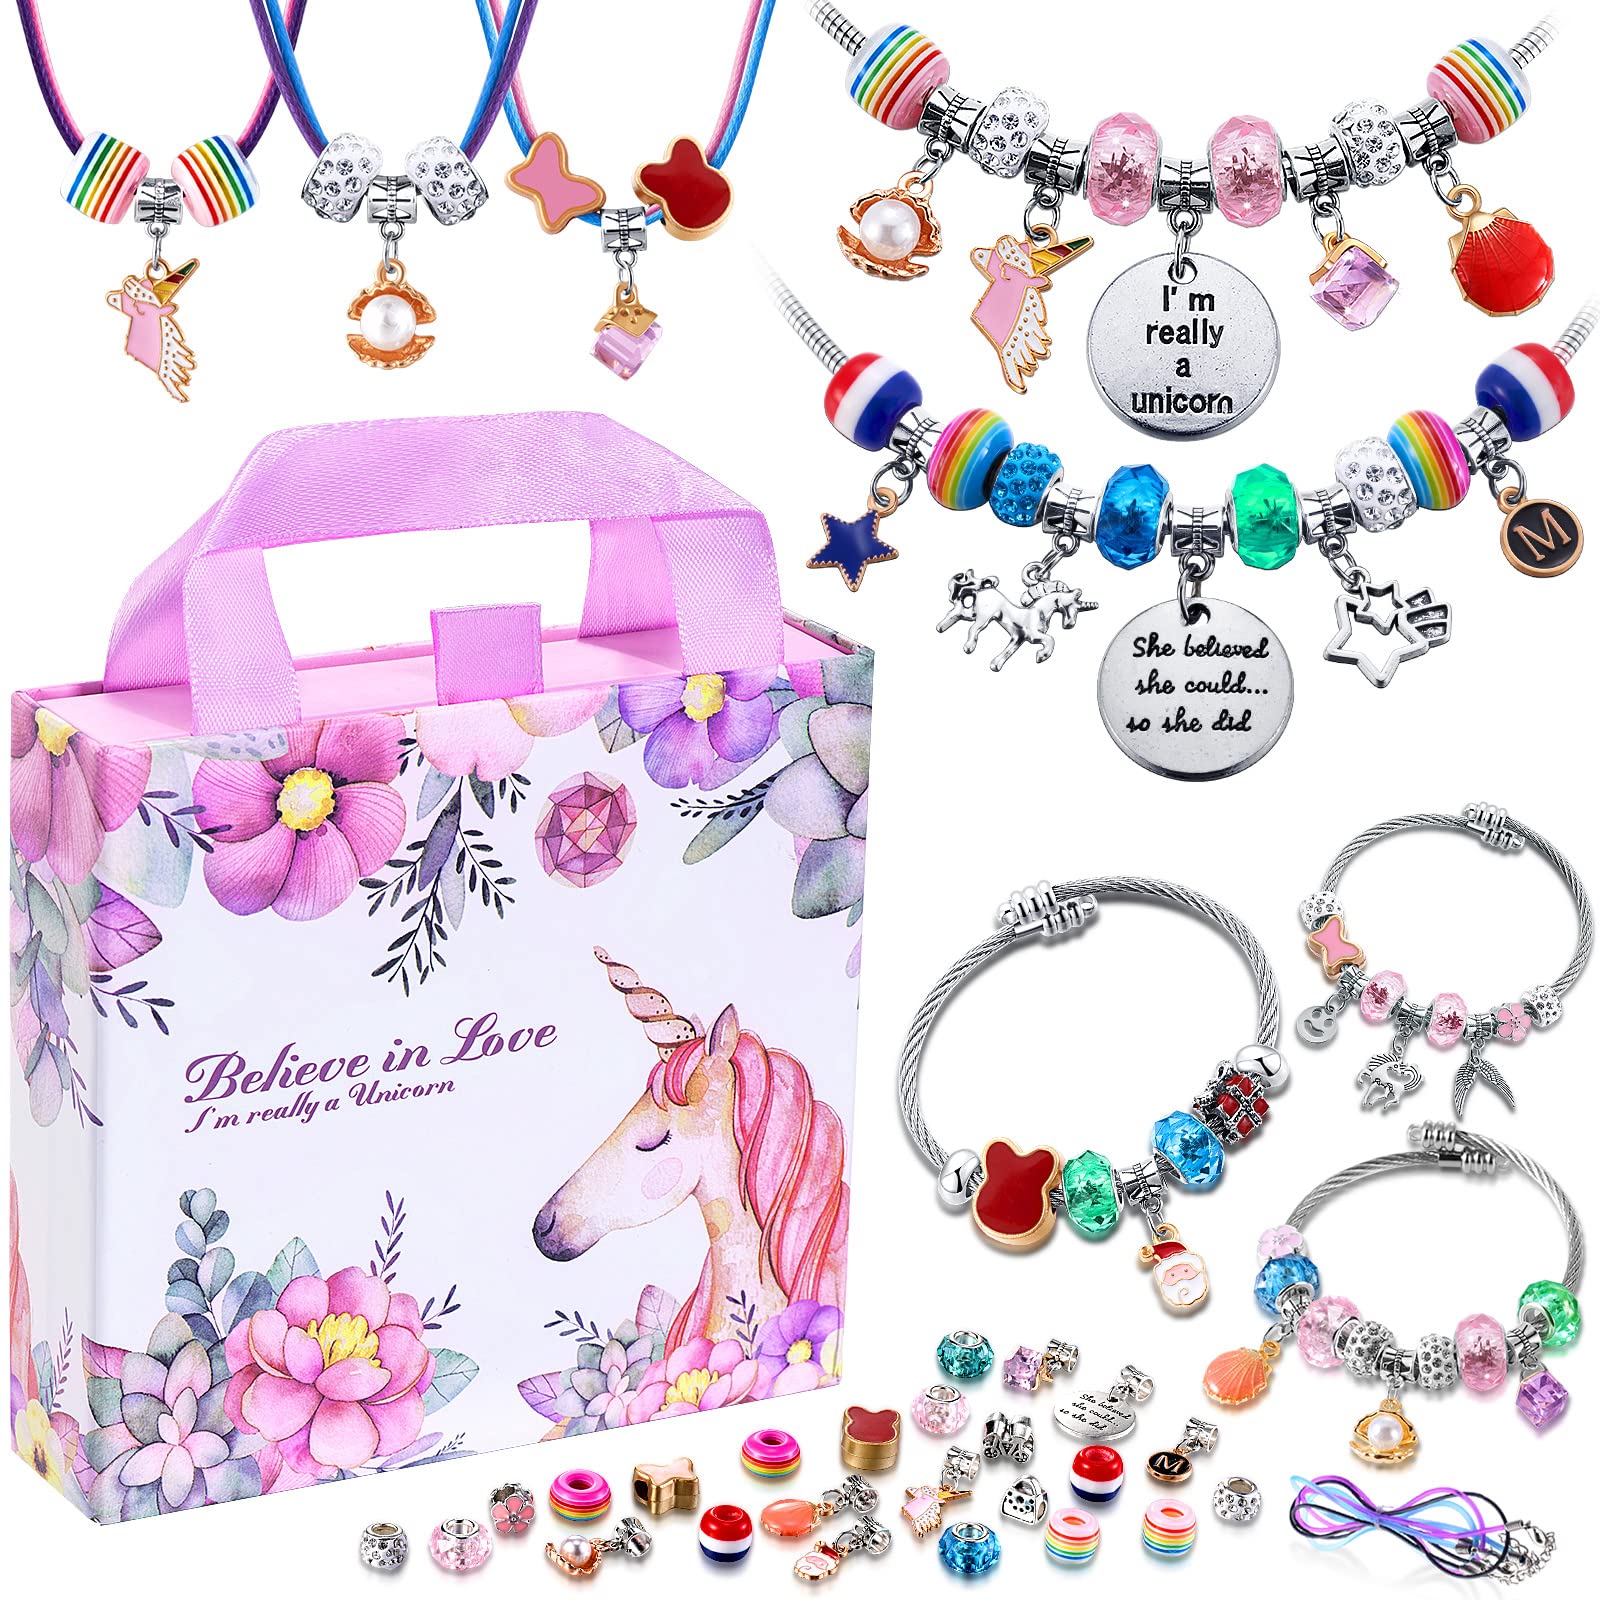 COO&KOO Charm Bracelet Making Kit, A Unicorn Girls Toy That Inspires Creativity and Imagination, Crafts for Ages 8-12 with Jewelry Making & Art Kit Perfect Gifts, Self-Expression!